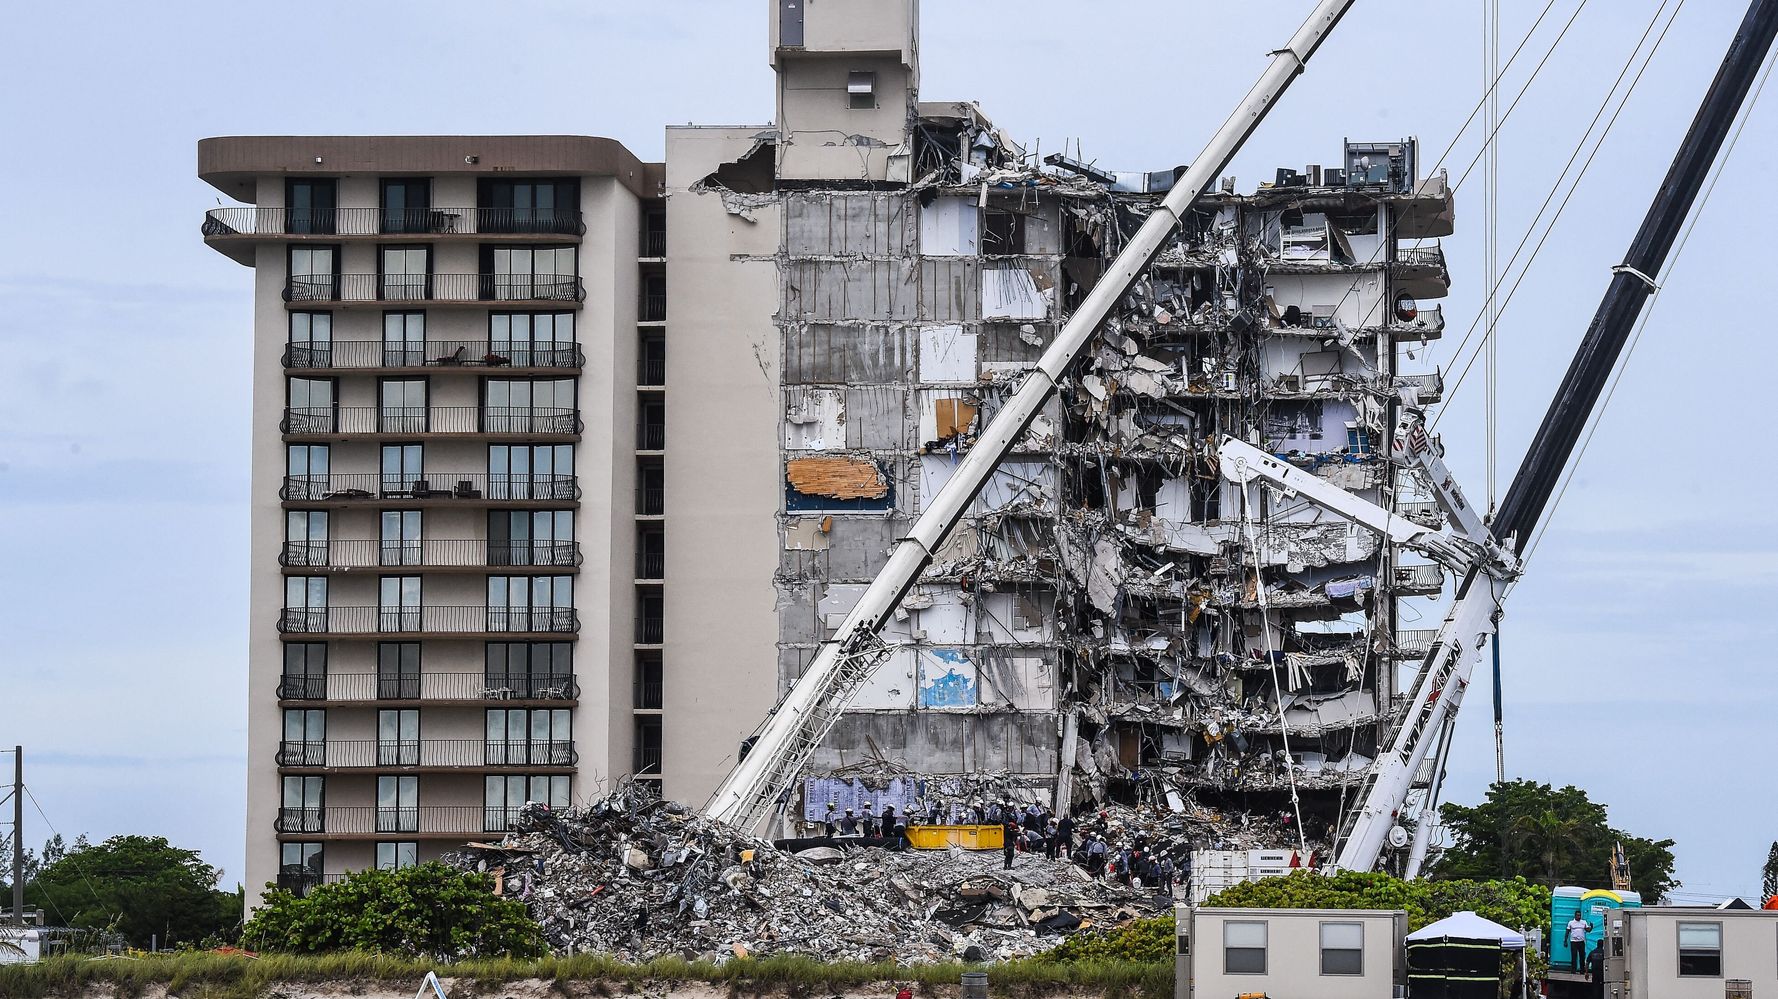 Letter Warned Of Collapsed Miami Building's Problems Months Ago